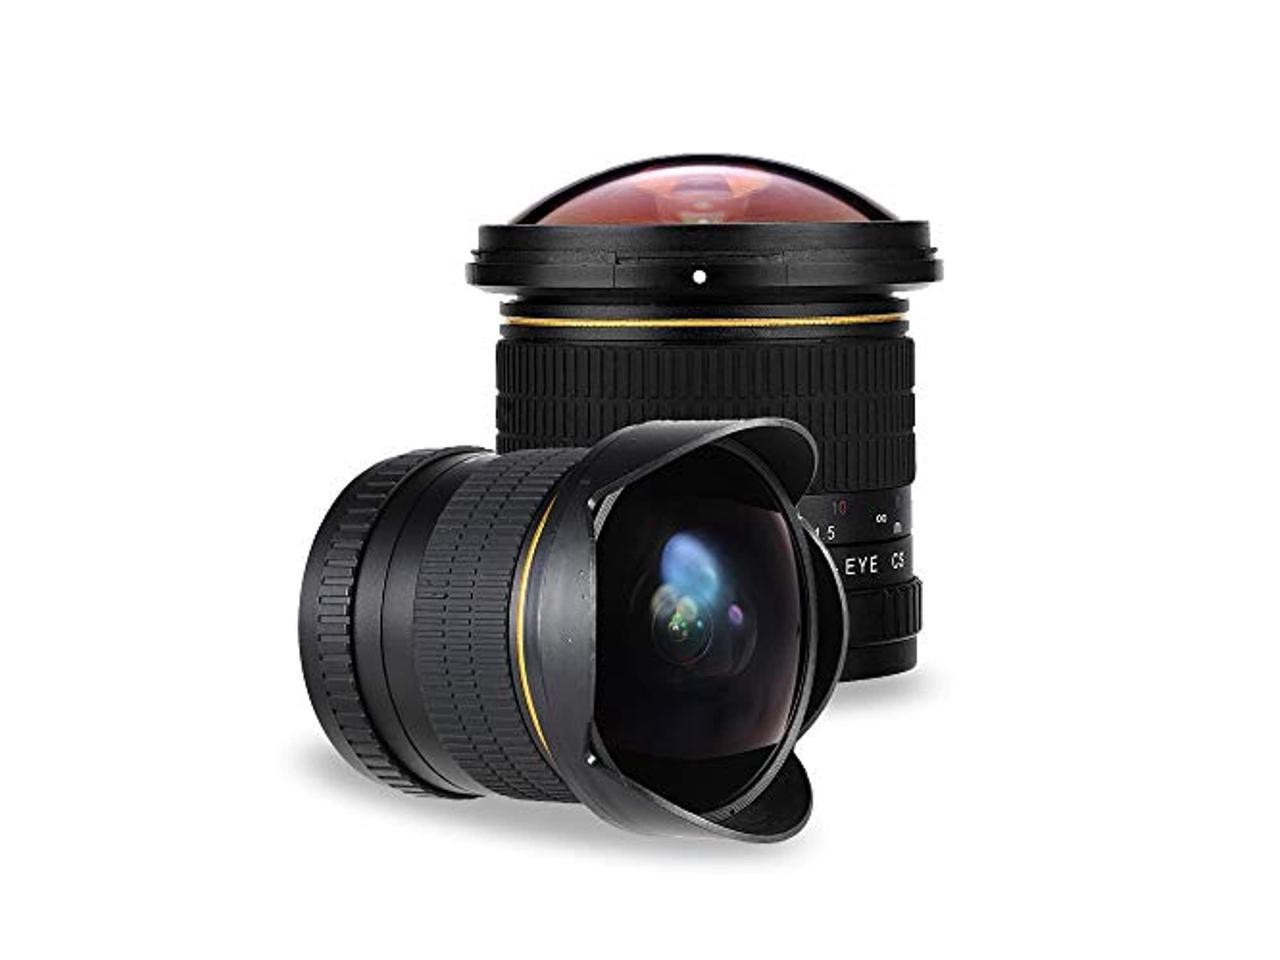 D7100 D5200 D7000 D3400 D3200 and D3100 Digital SLR Cameras D5100 D7200 D5500 D5300 Opteka 6.5mm f/3.5 HD Aspherical Wide Angle Fisheye Lens with Optical Cleaning Kit for Nikon D7500 D3300 